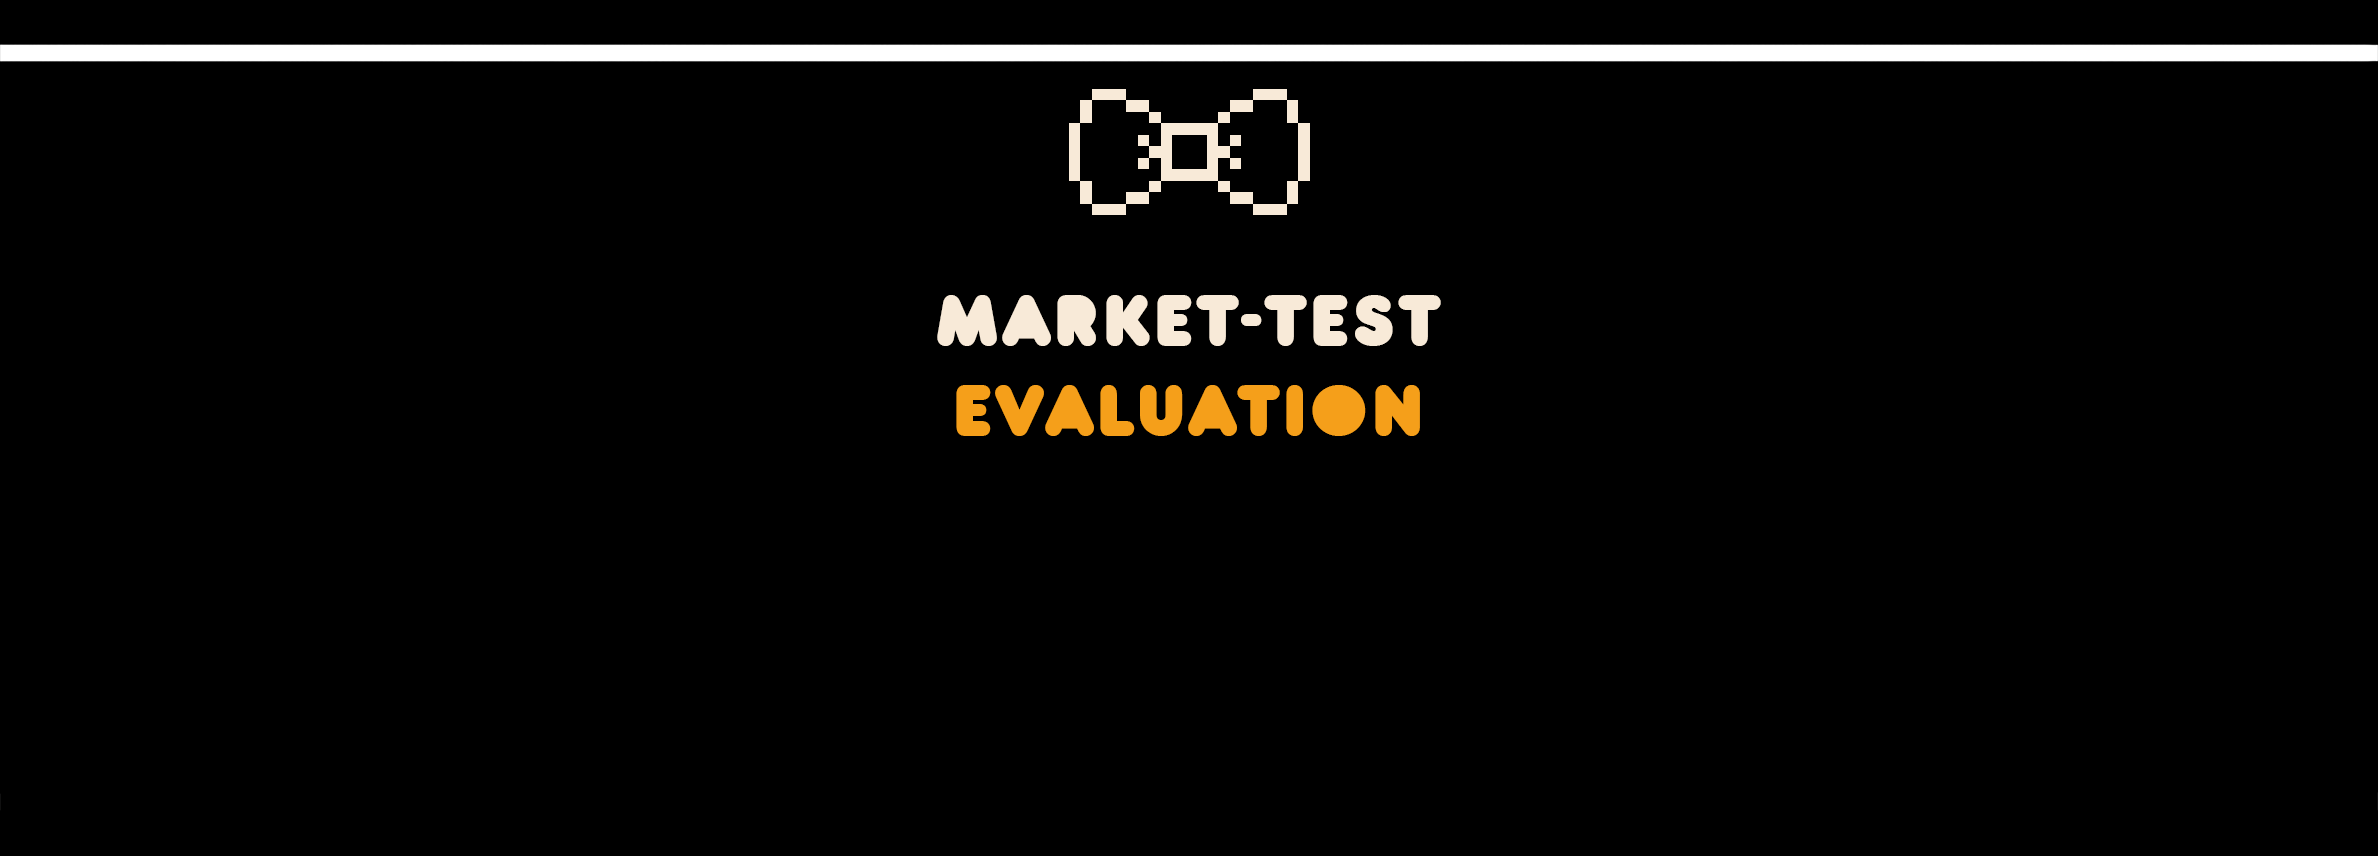 Article cover image for "Systematic Evaluation of Market Testing"